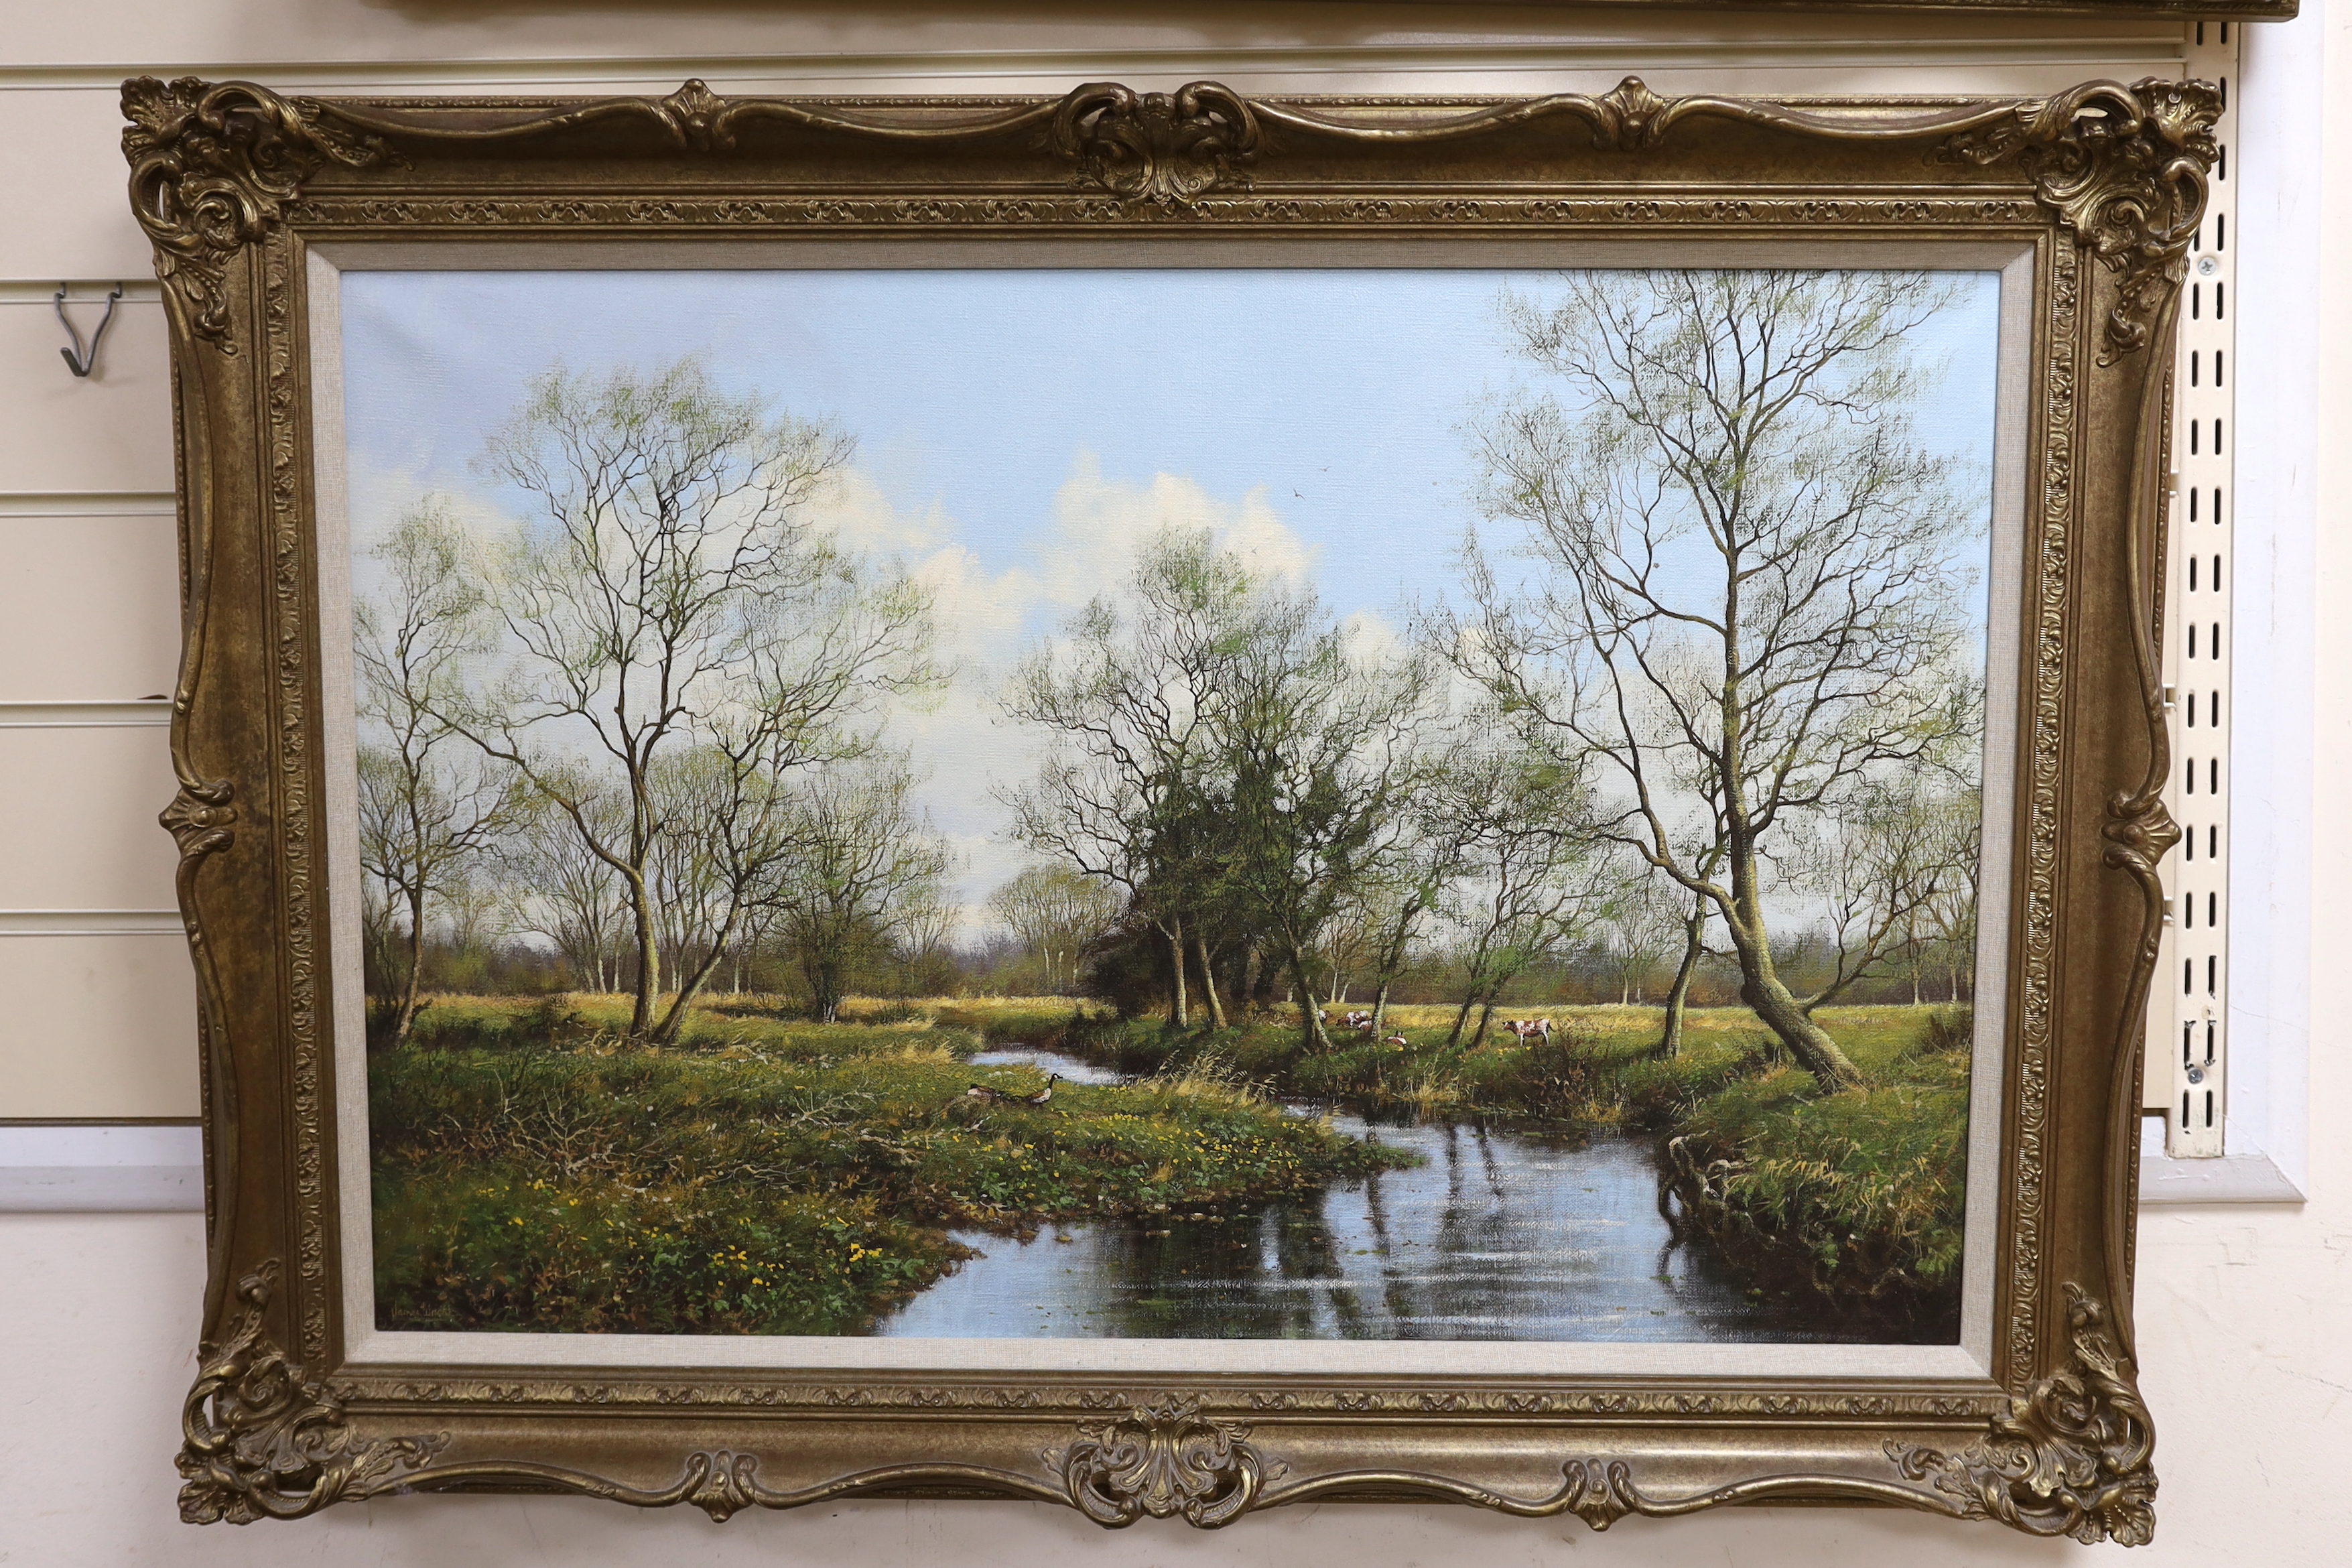 James Wright (b.1935), oil on canvas, River Tat at Cotsford neat Tattergett, signed, 50 x 76cm - Image 2 of 3